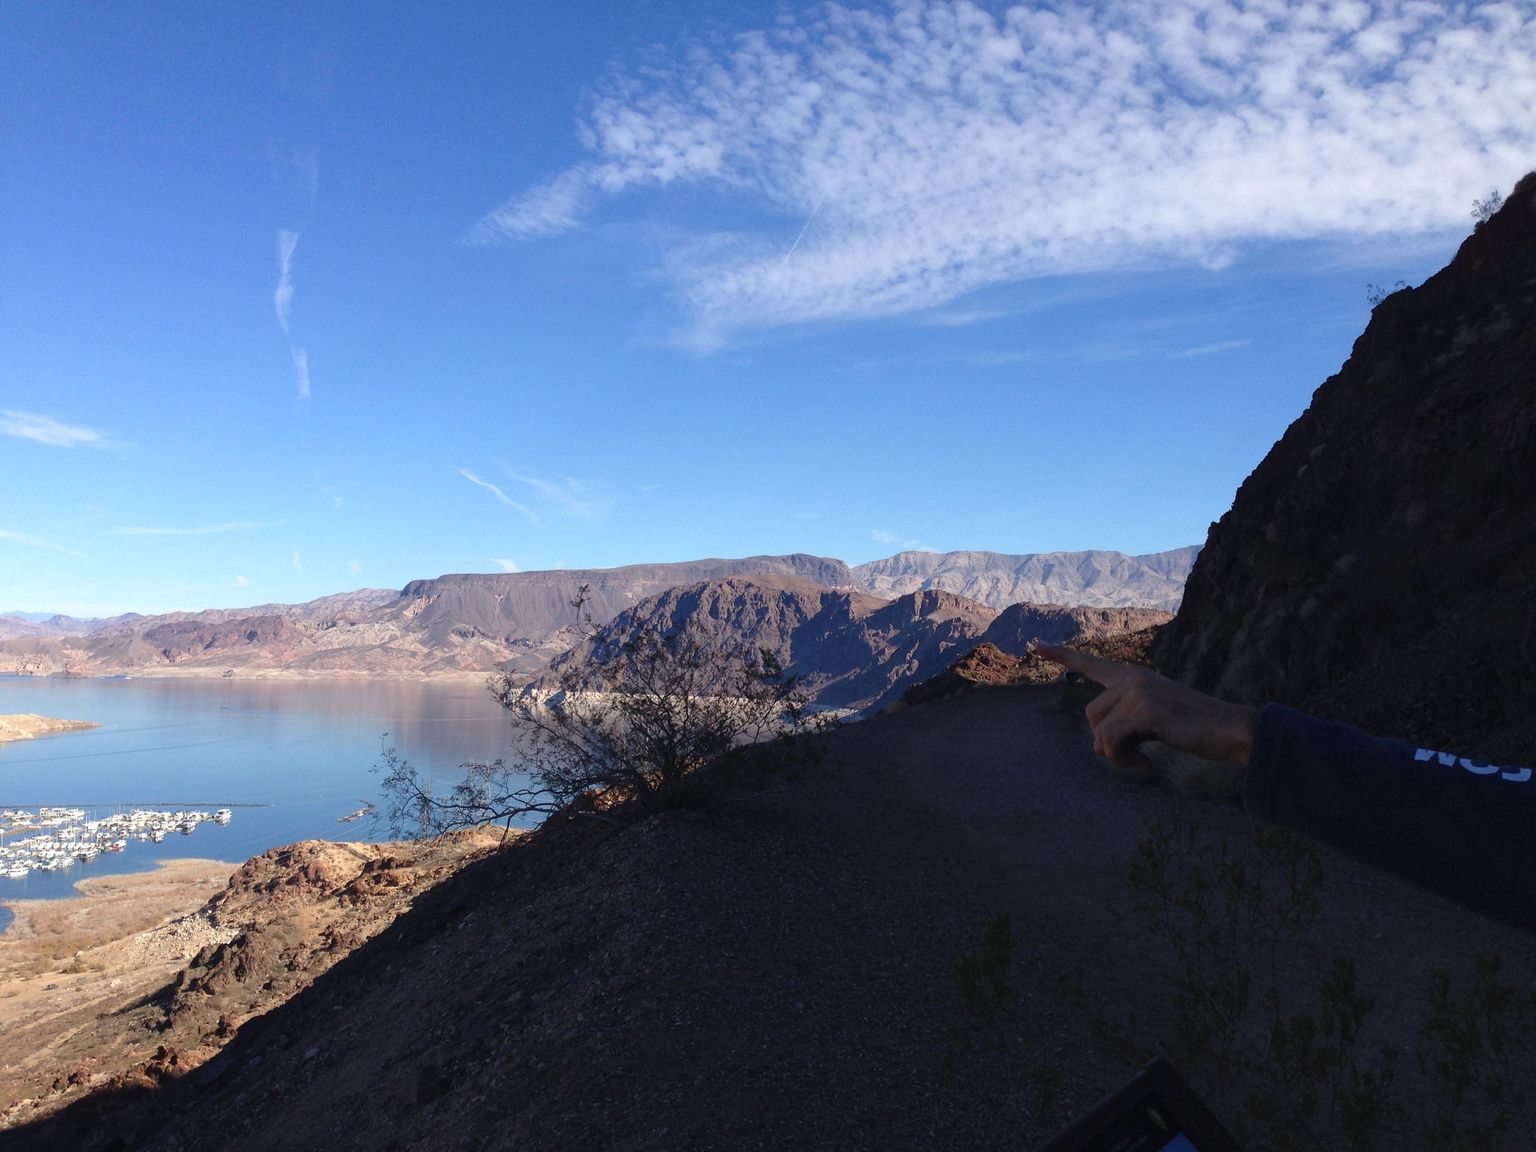 A view from our tour while we were biking to the Hoover Dam.